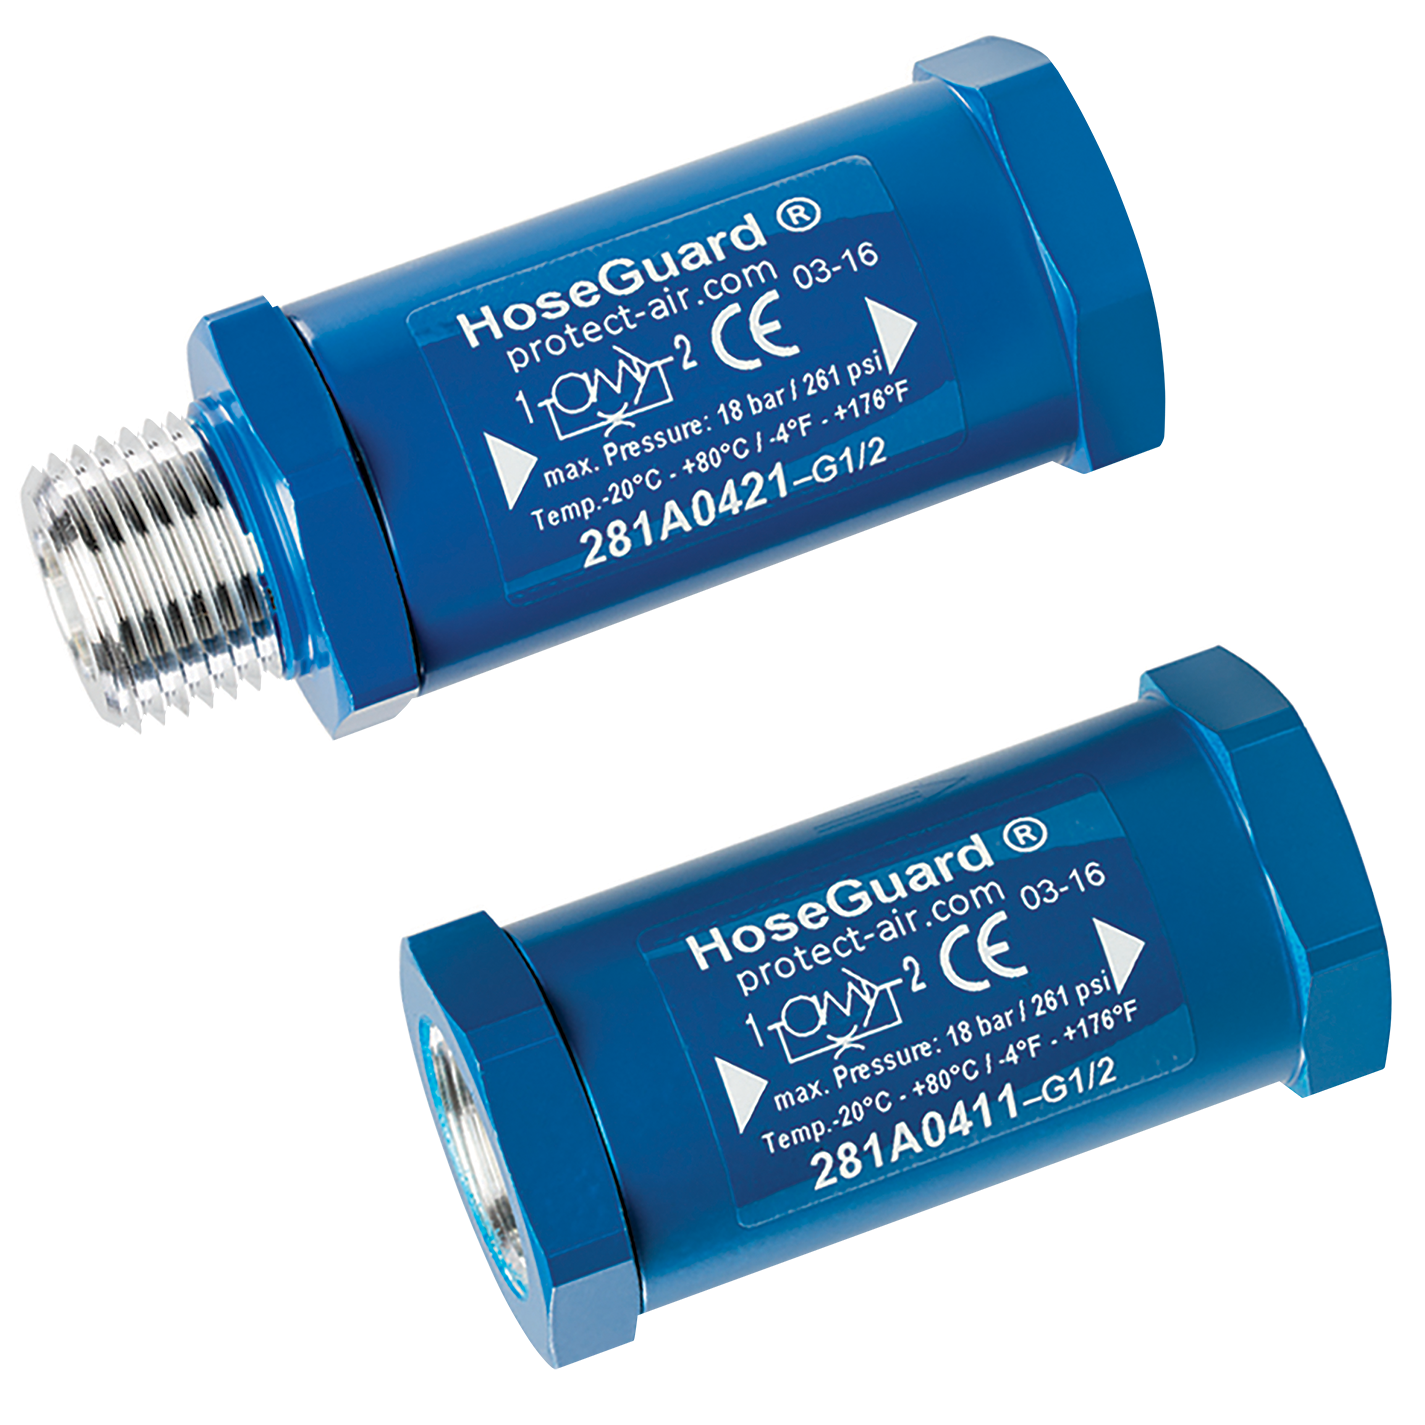 HOSEGUARD AIRFUSE 1/2" BSPP MALE/FEM